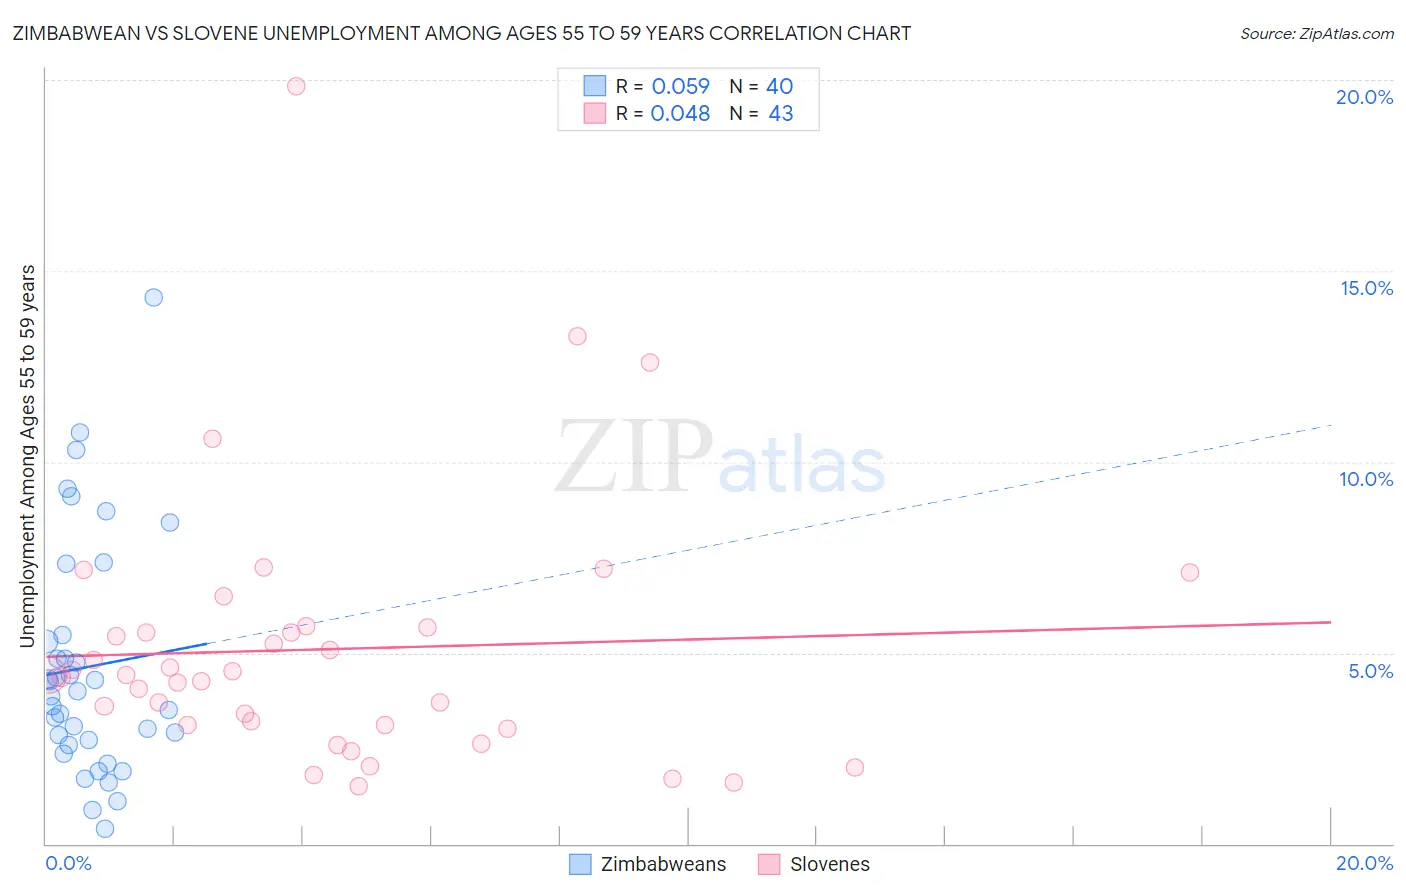 Zimbabwean vs Slovene Unemployment Among Ages 55 to 59 years